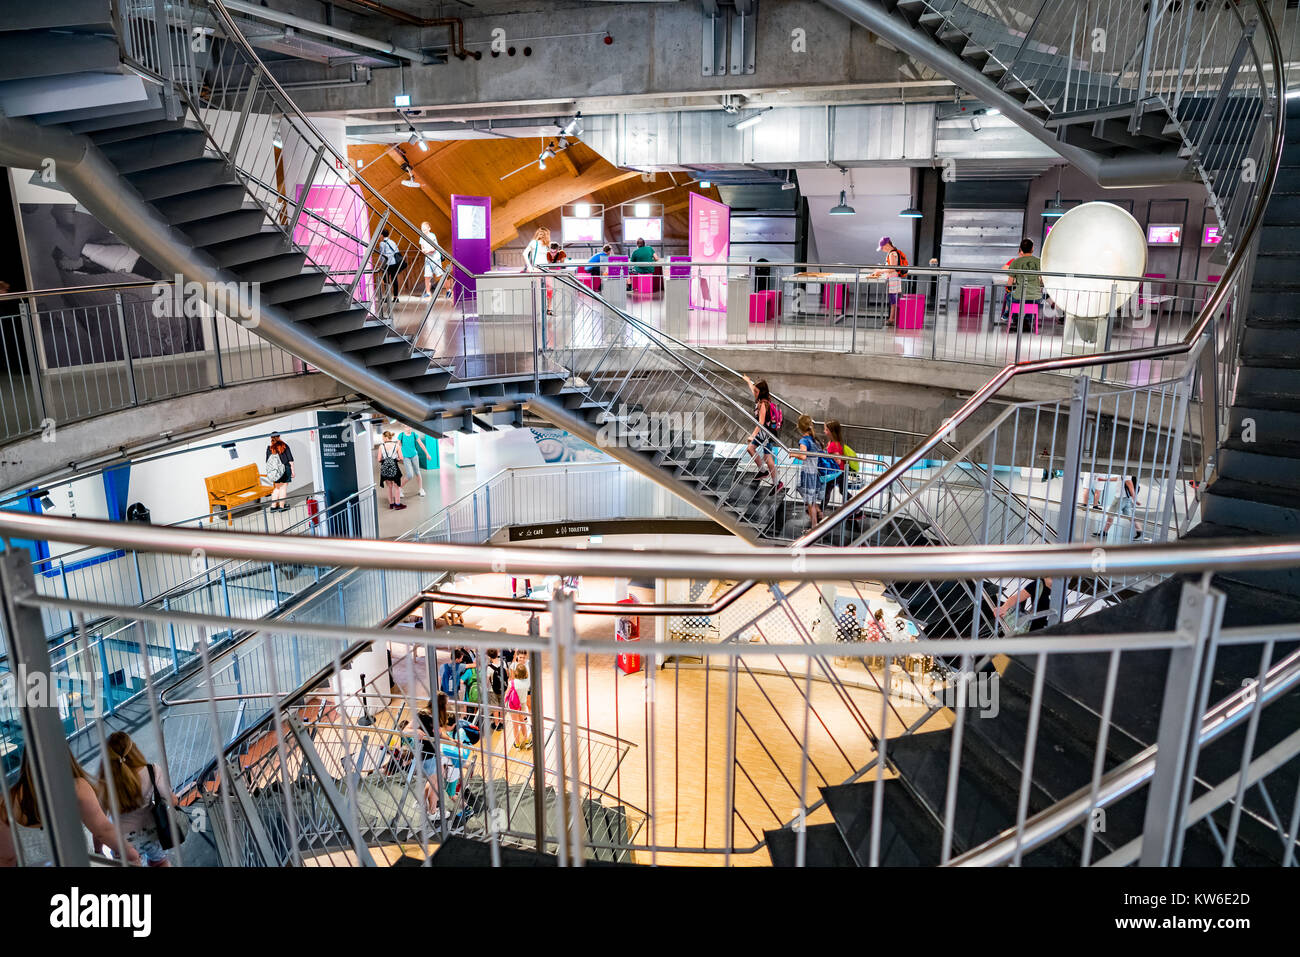 BREMEN GERMANY: JUNE 19, 2017: Universum Science Center building in Bremen. For the first five years since opening, nearly 2.5 million visitors visite Stock Photo